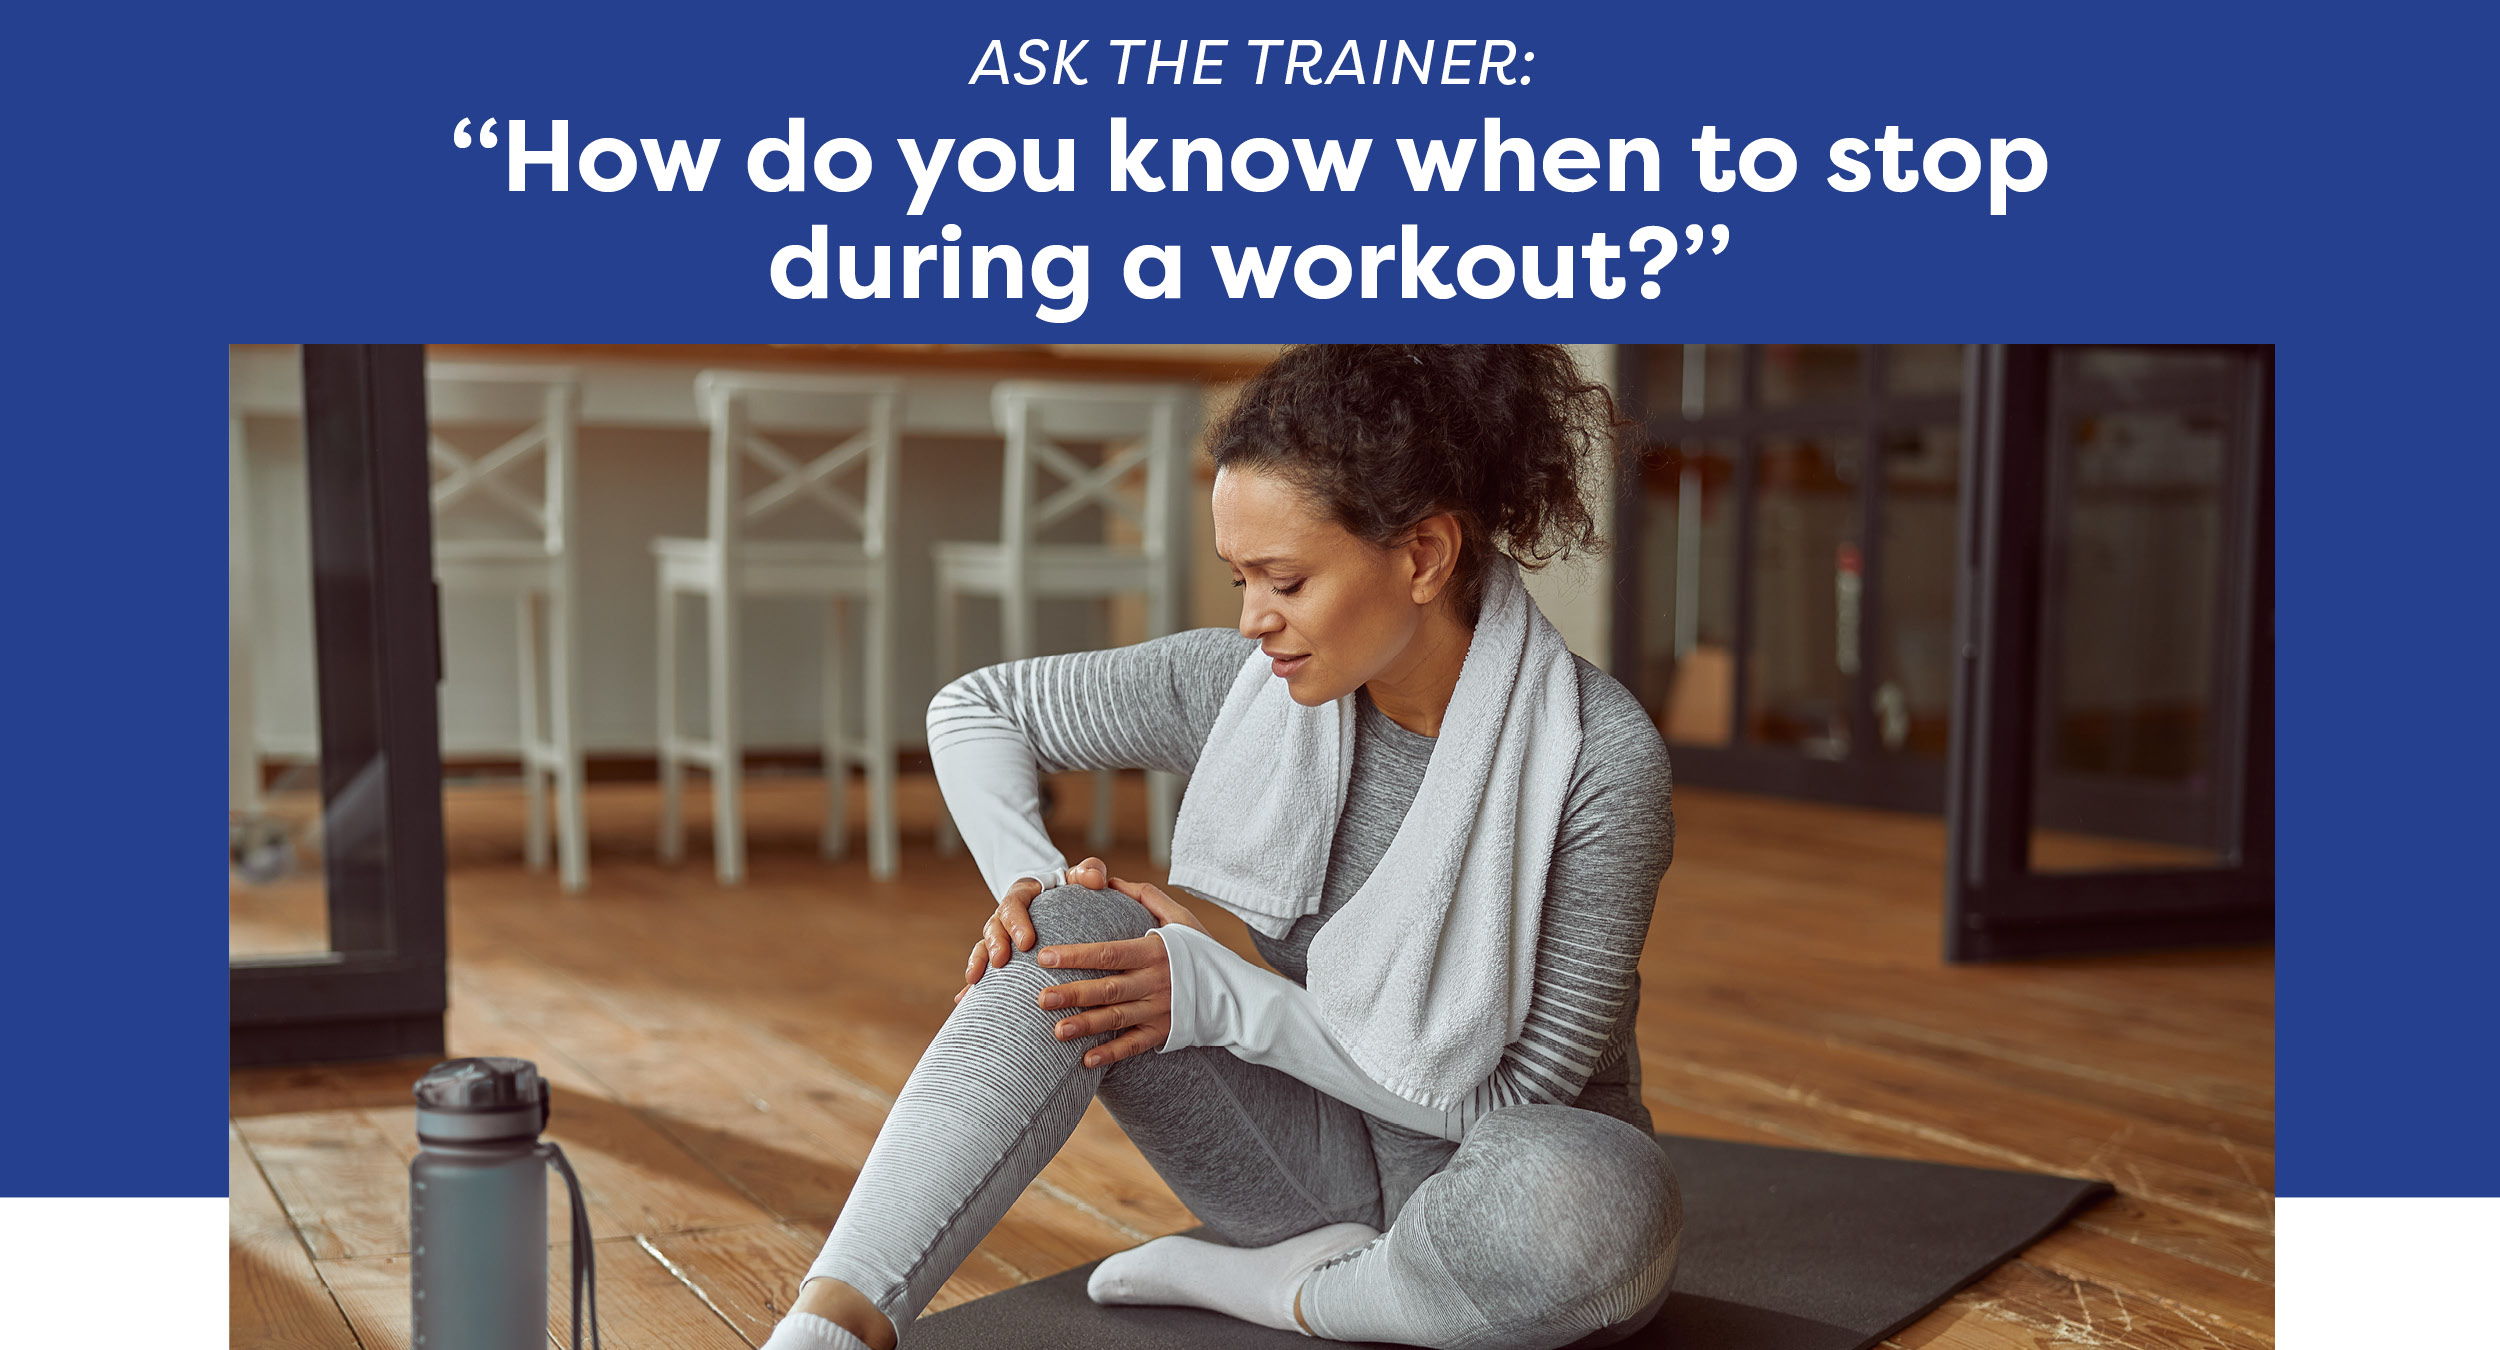 Ask the trainer: “How do you know when to stop during a workout?”